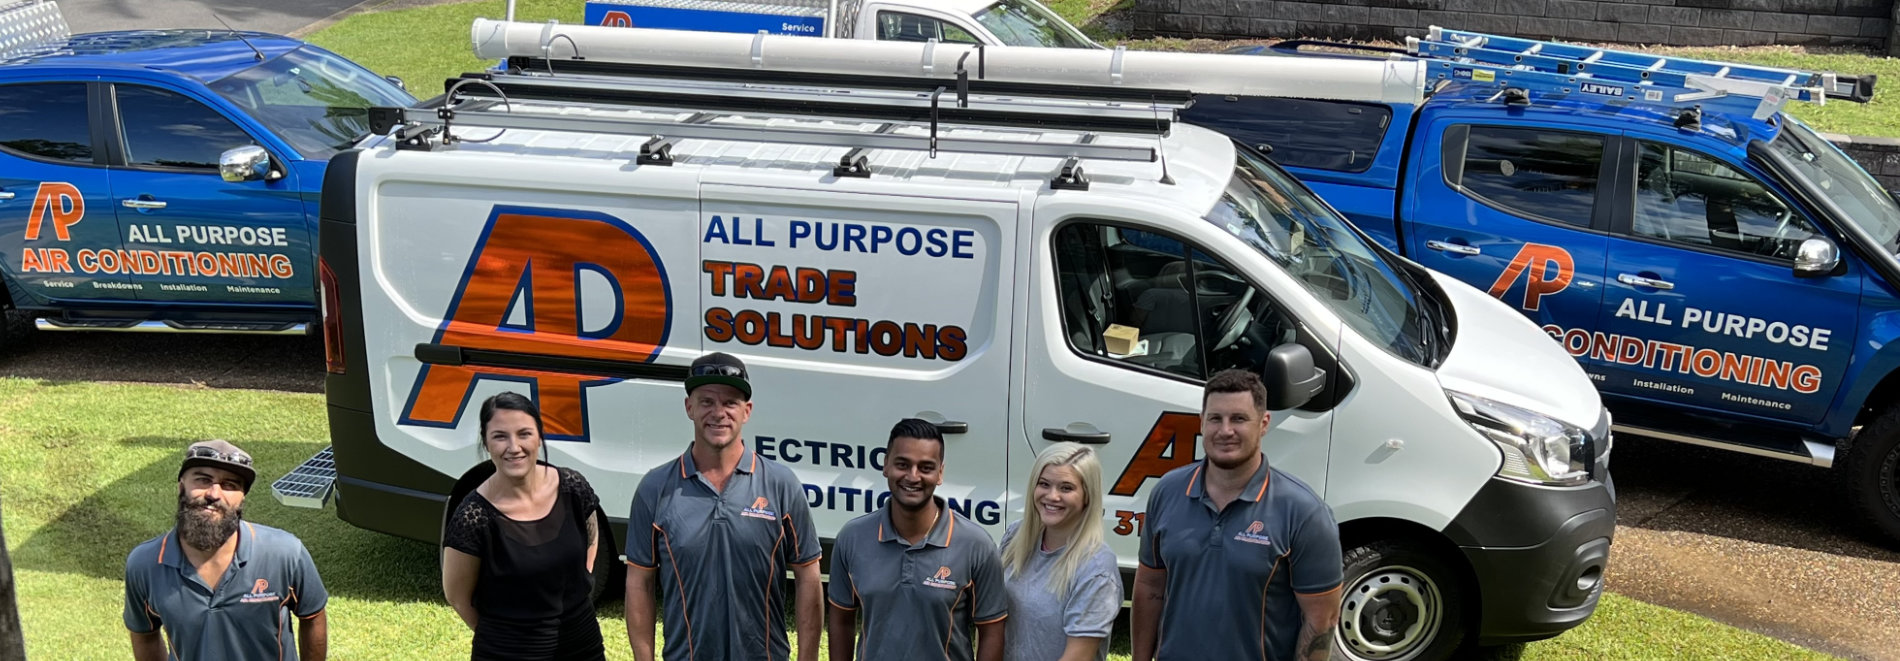 All Purpose Trade Solutions team with branded ute